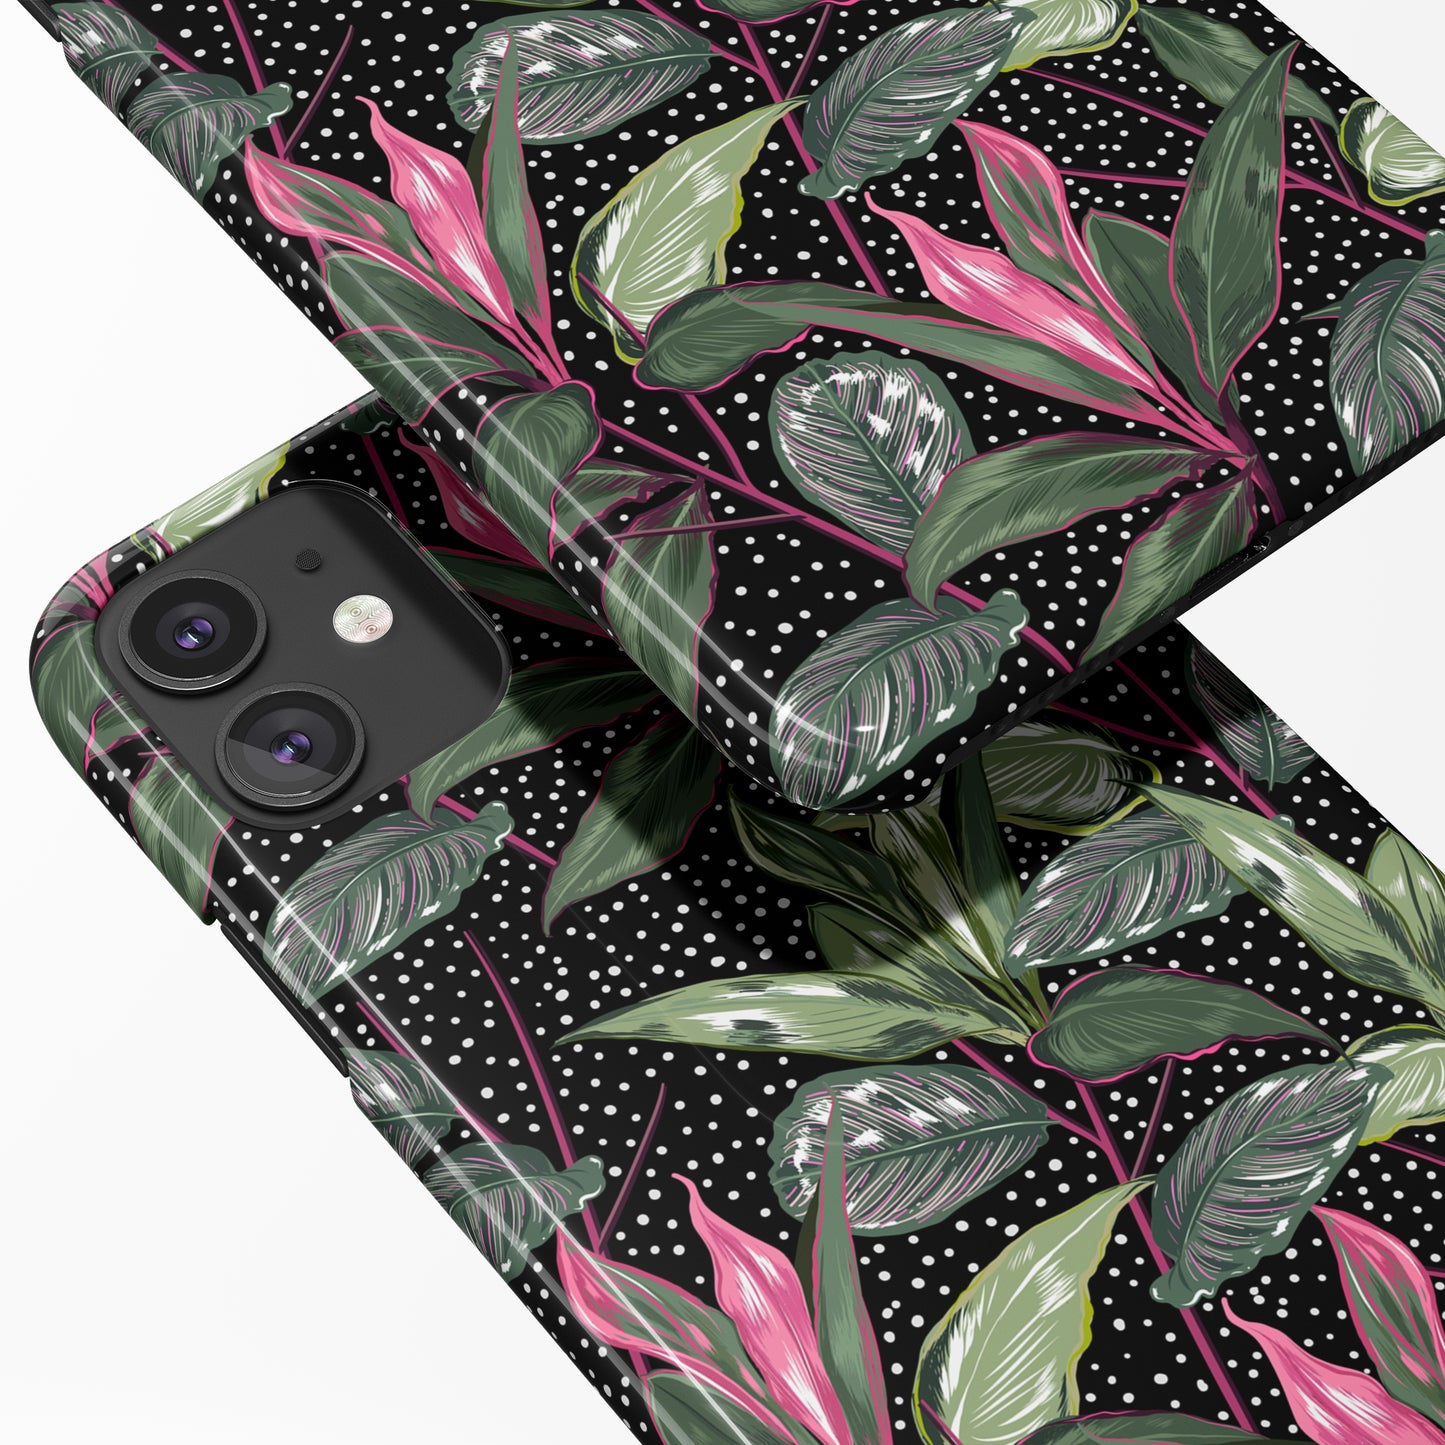 Black Flowers with Dots Pattern iPhone Case